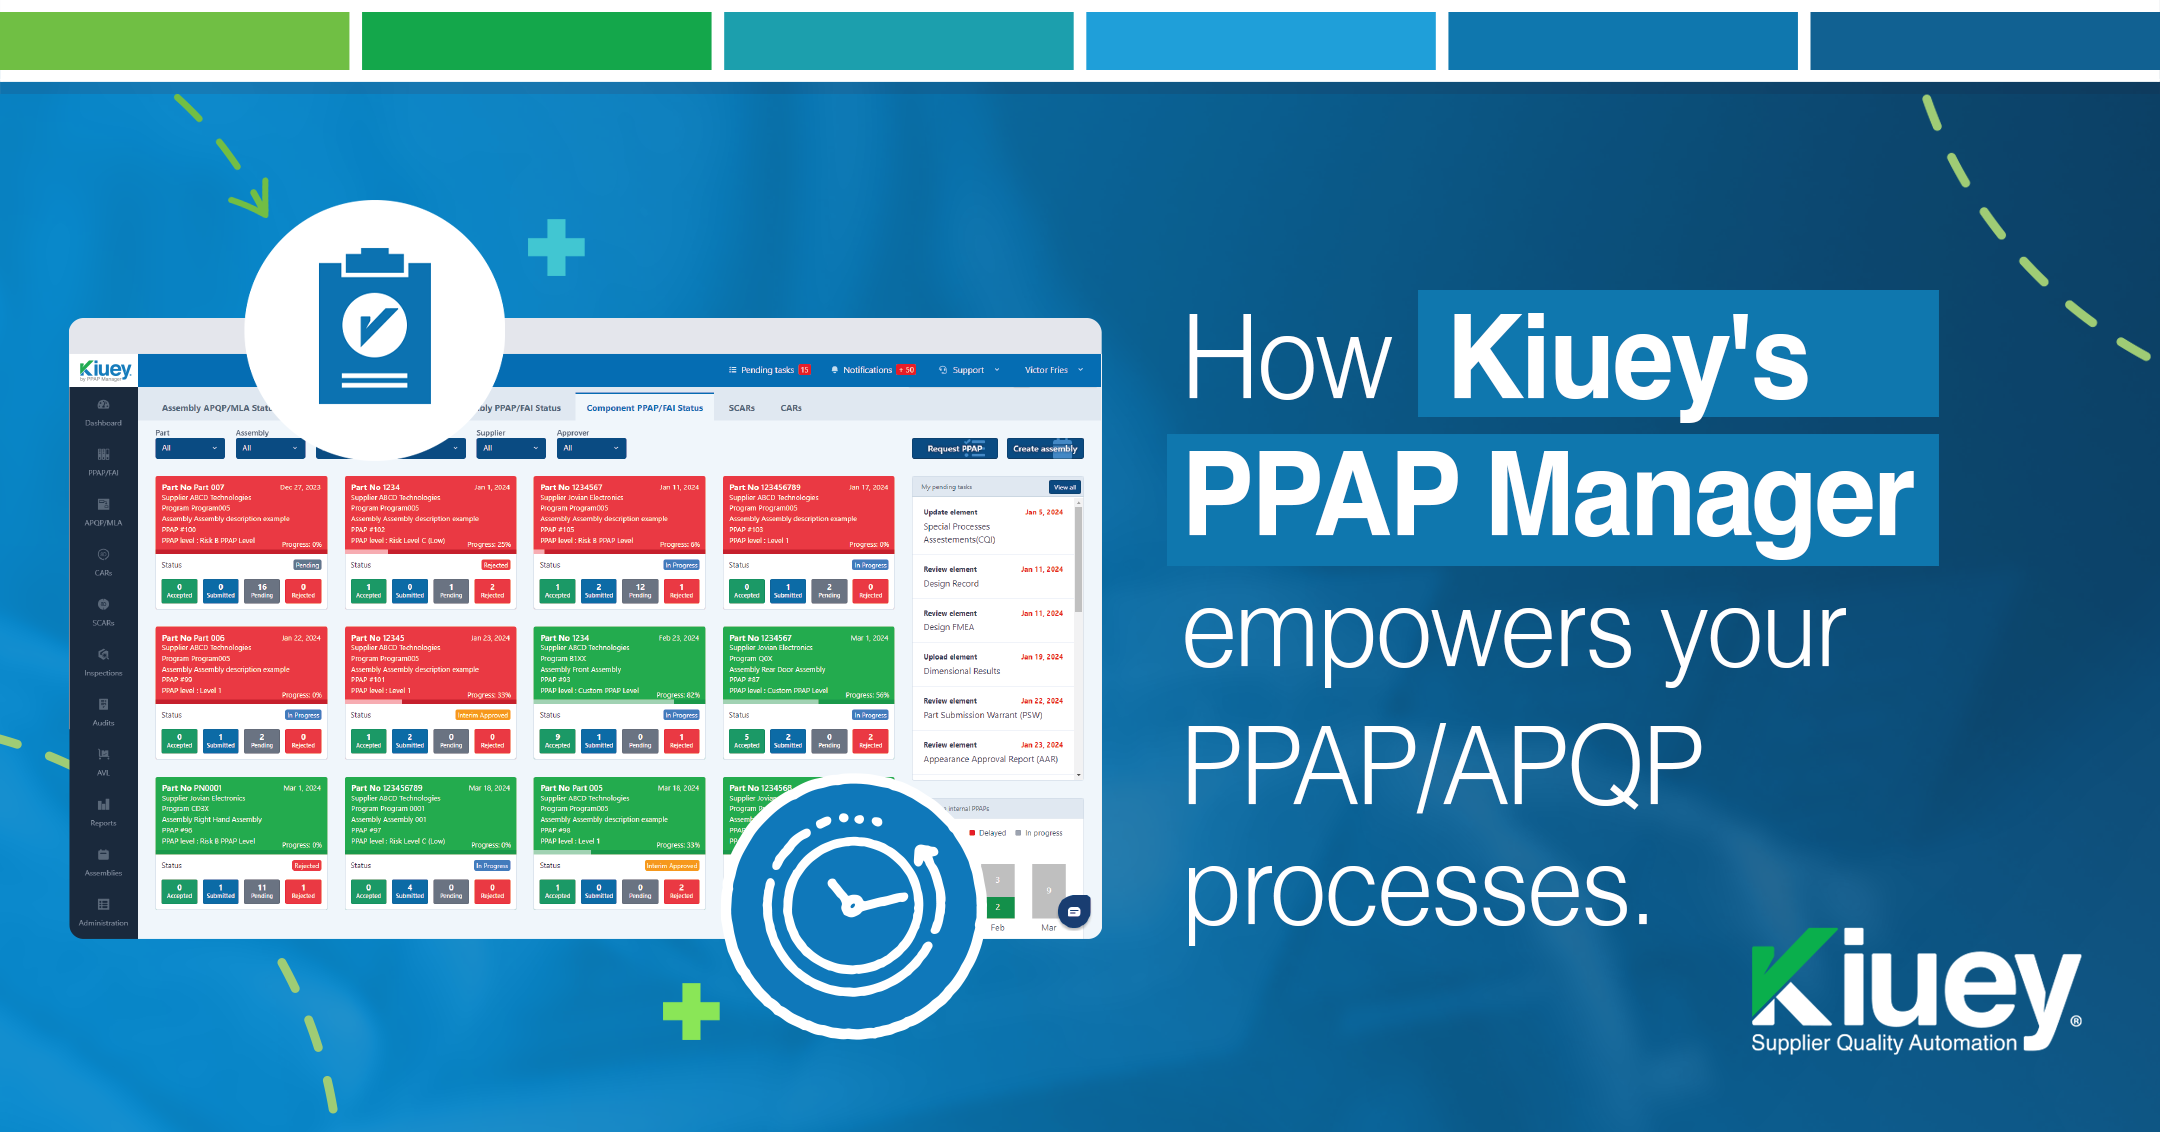 How Kiuey’s PPAP manager empowers your PPAP/APQP processes